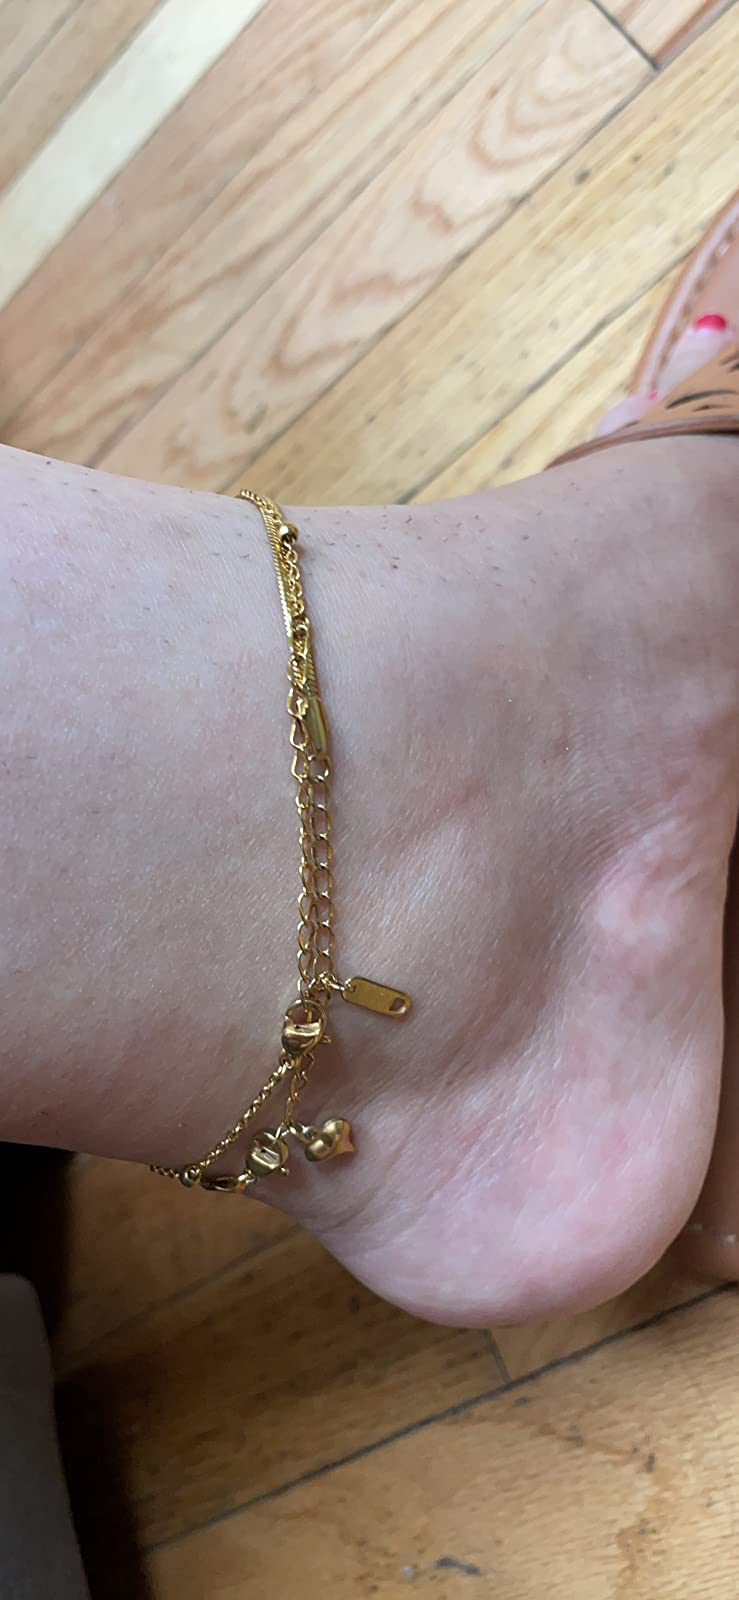 Is it good to wear a gold anklet? - Quora